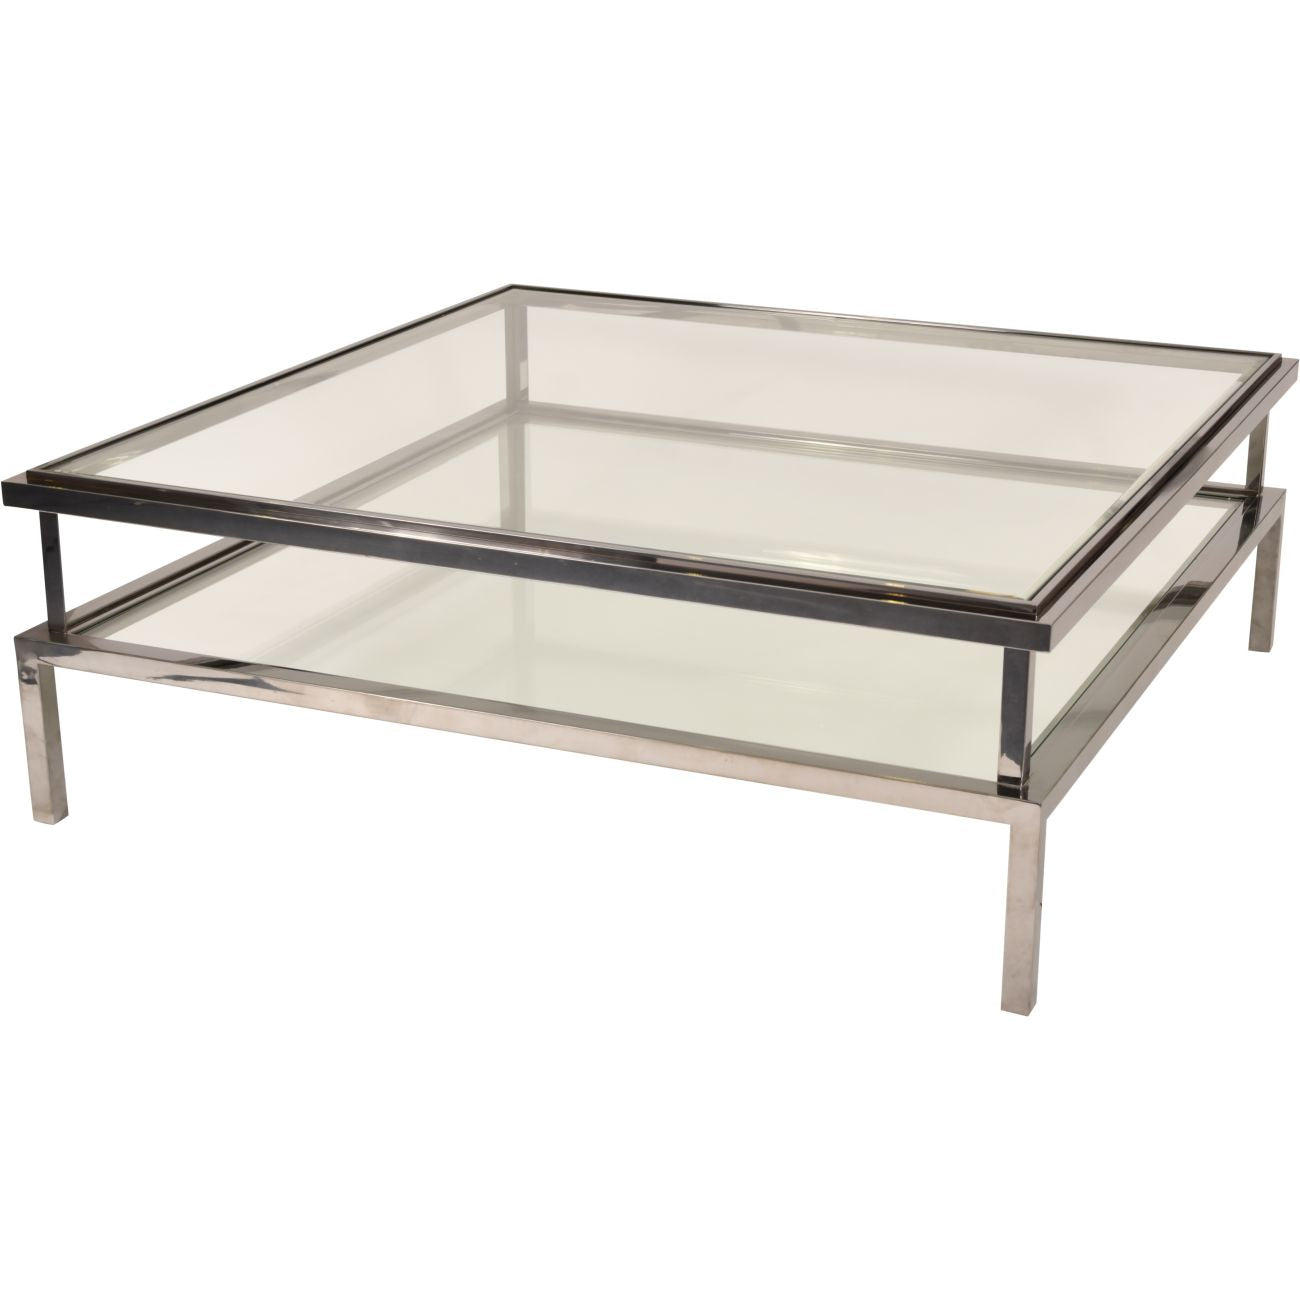 Knightsbridge Stainless Steel and Glass Square Coffee Table 120x120x42cm